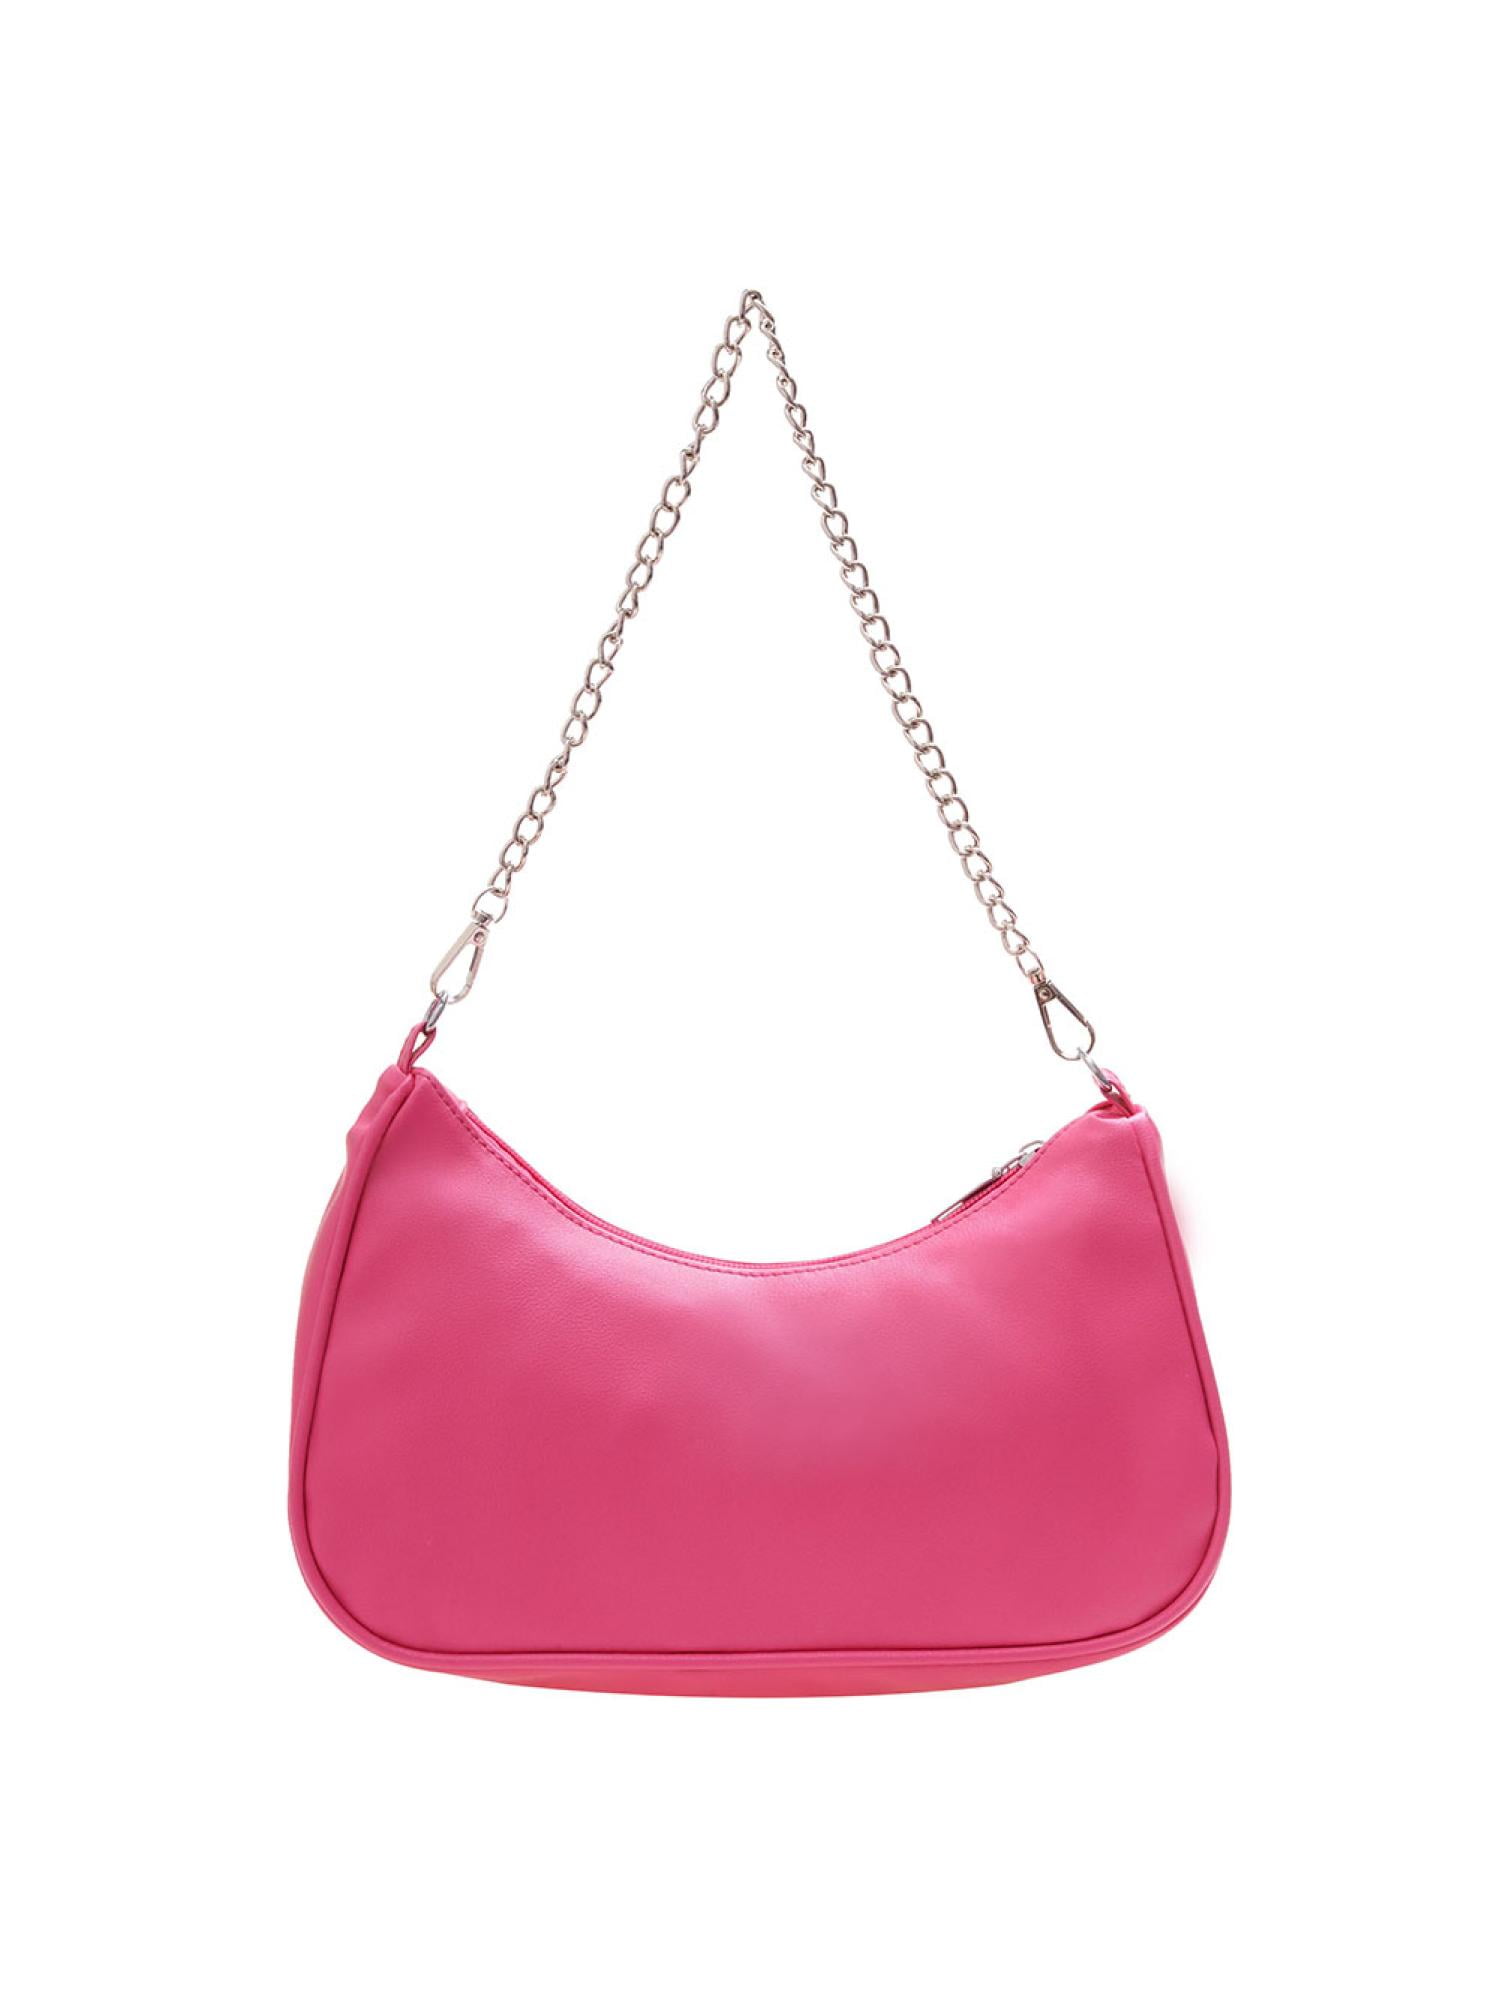 Women's Chain Underarm Shoulder Bag Glossy Patent Leather Hot